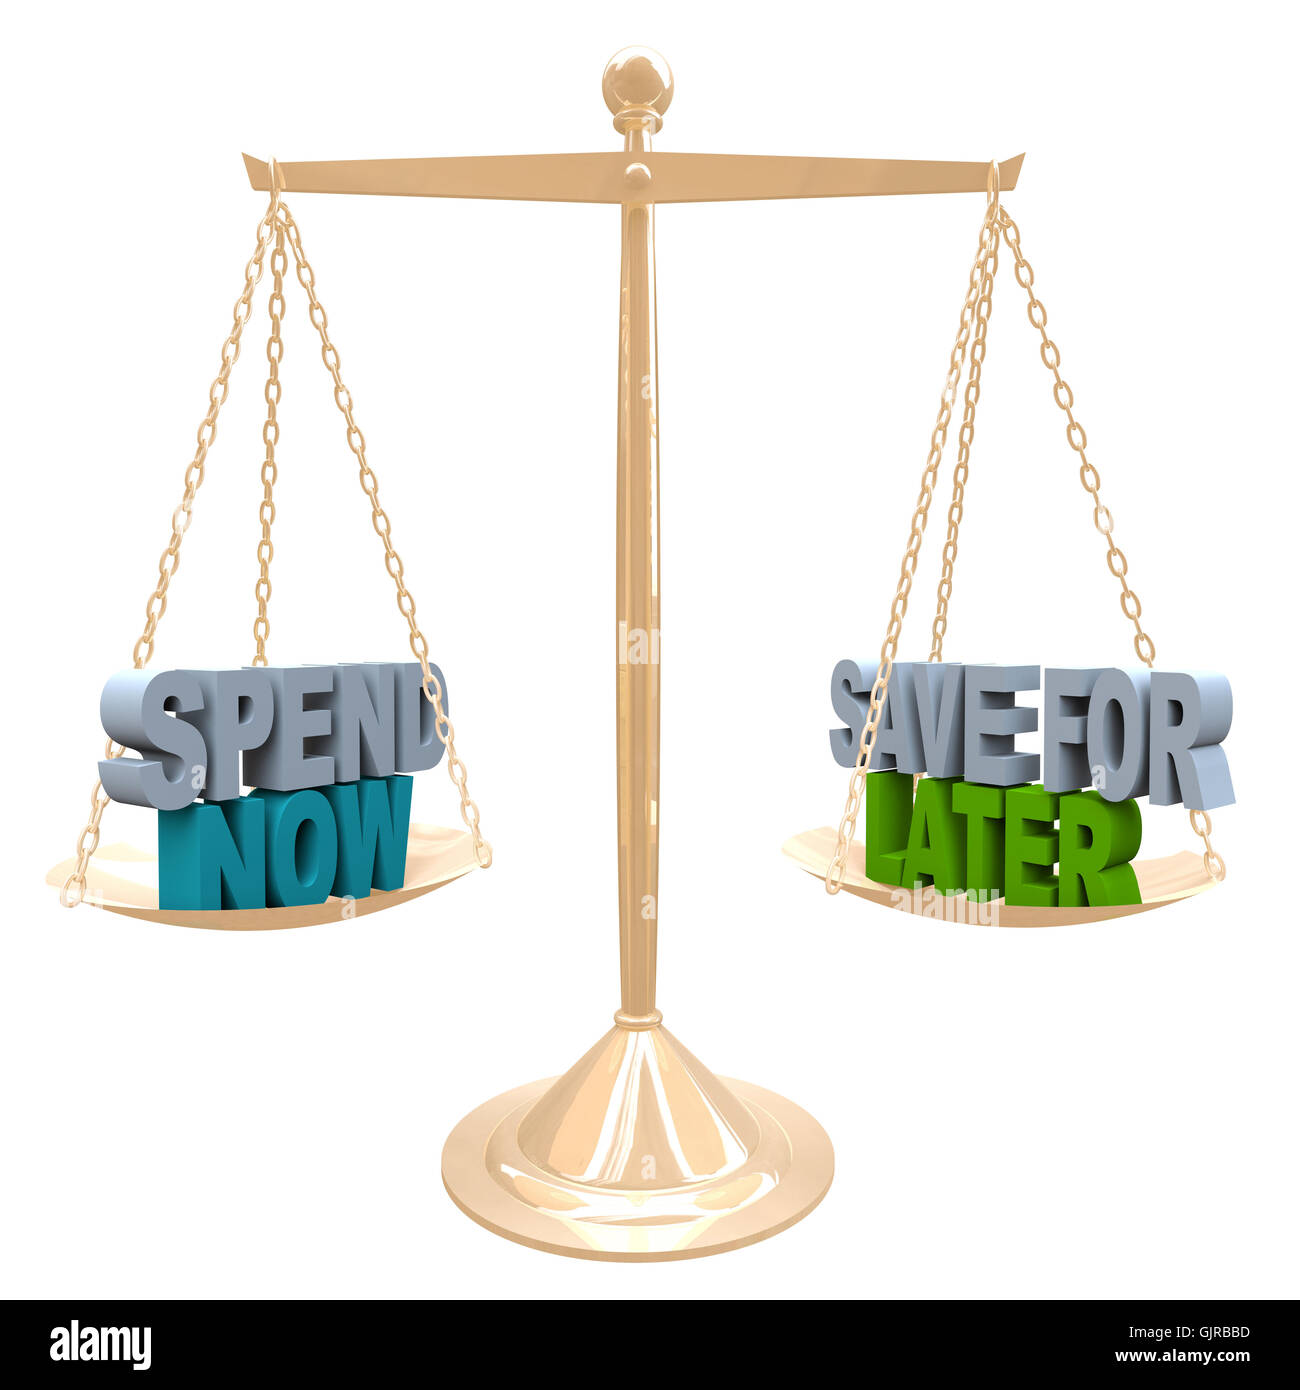 Spend Now vs Save for Later Balance Budget Money Stock Photo